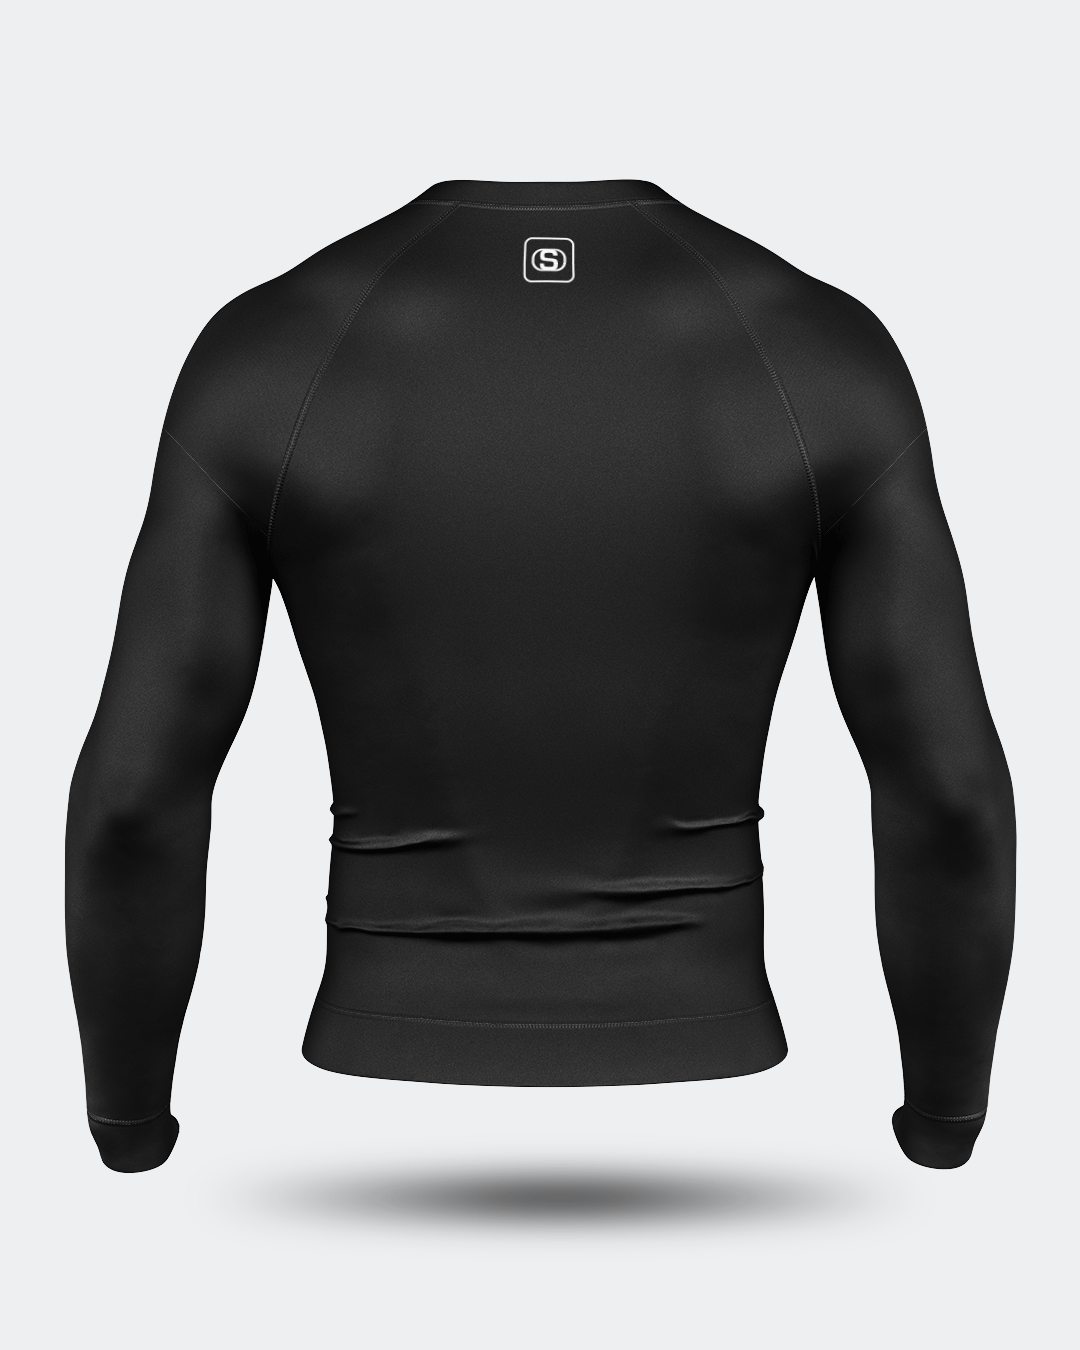 Onboard Base Layer